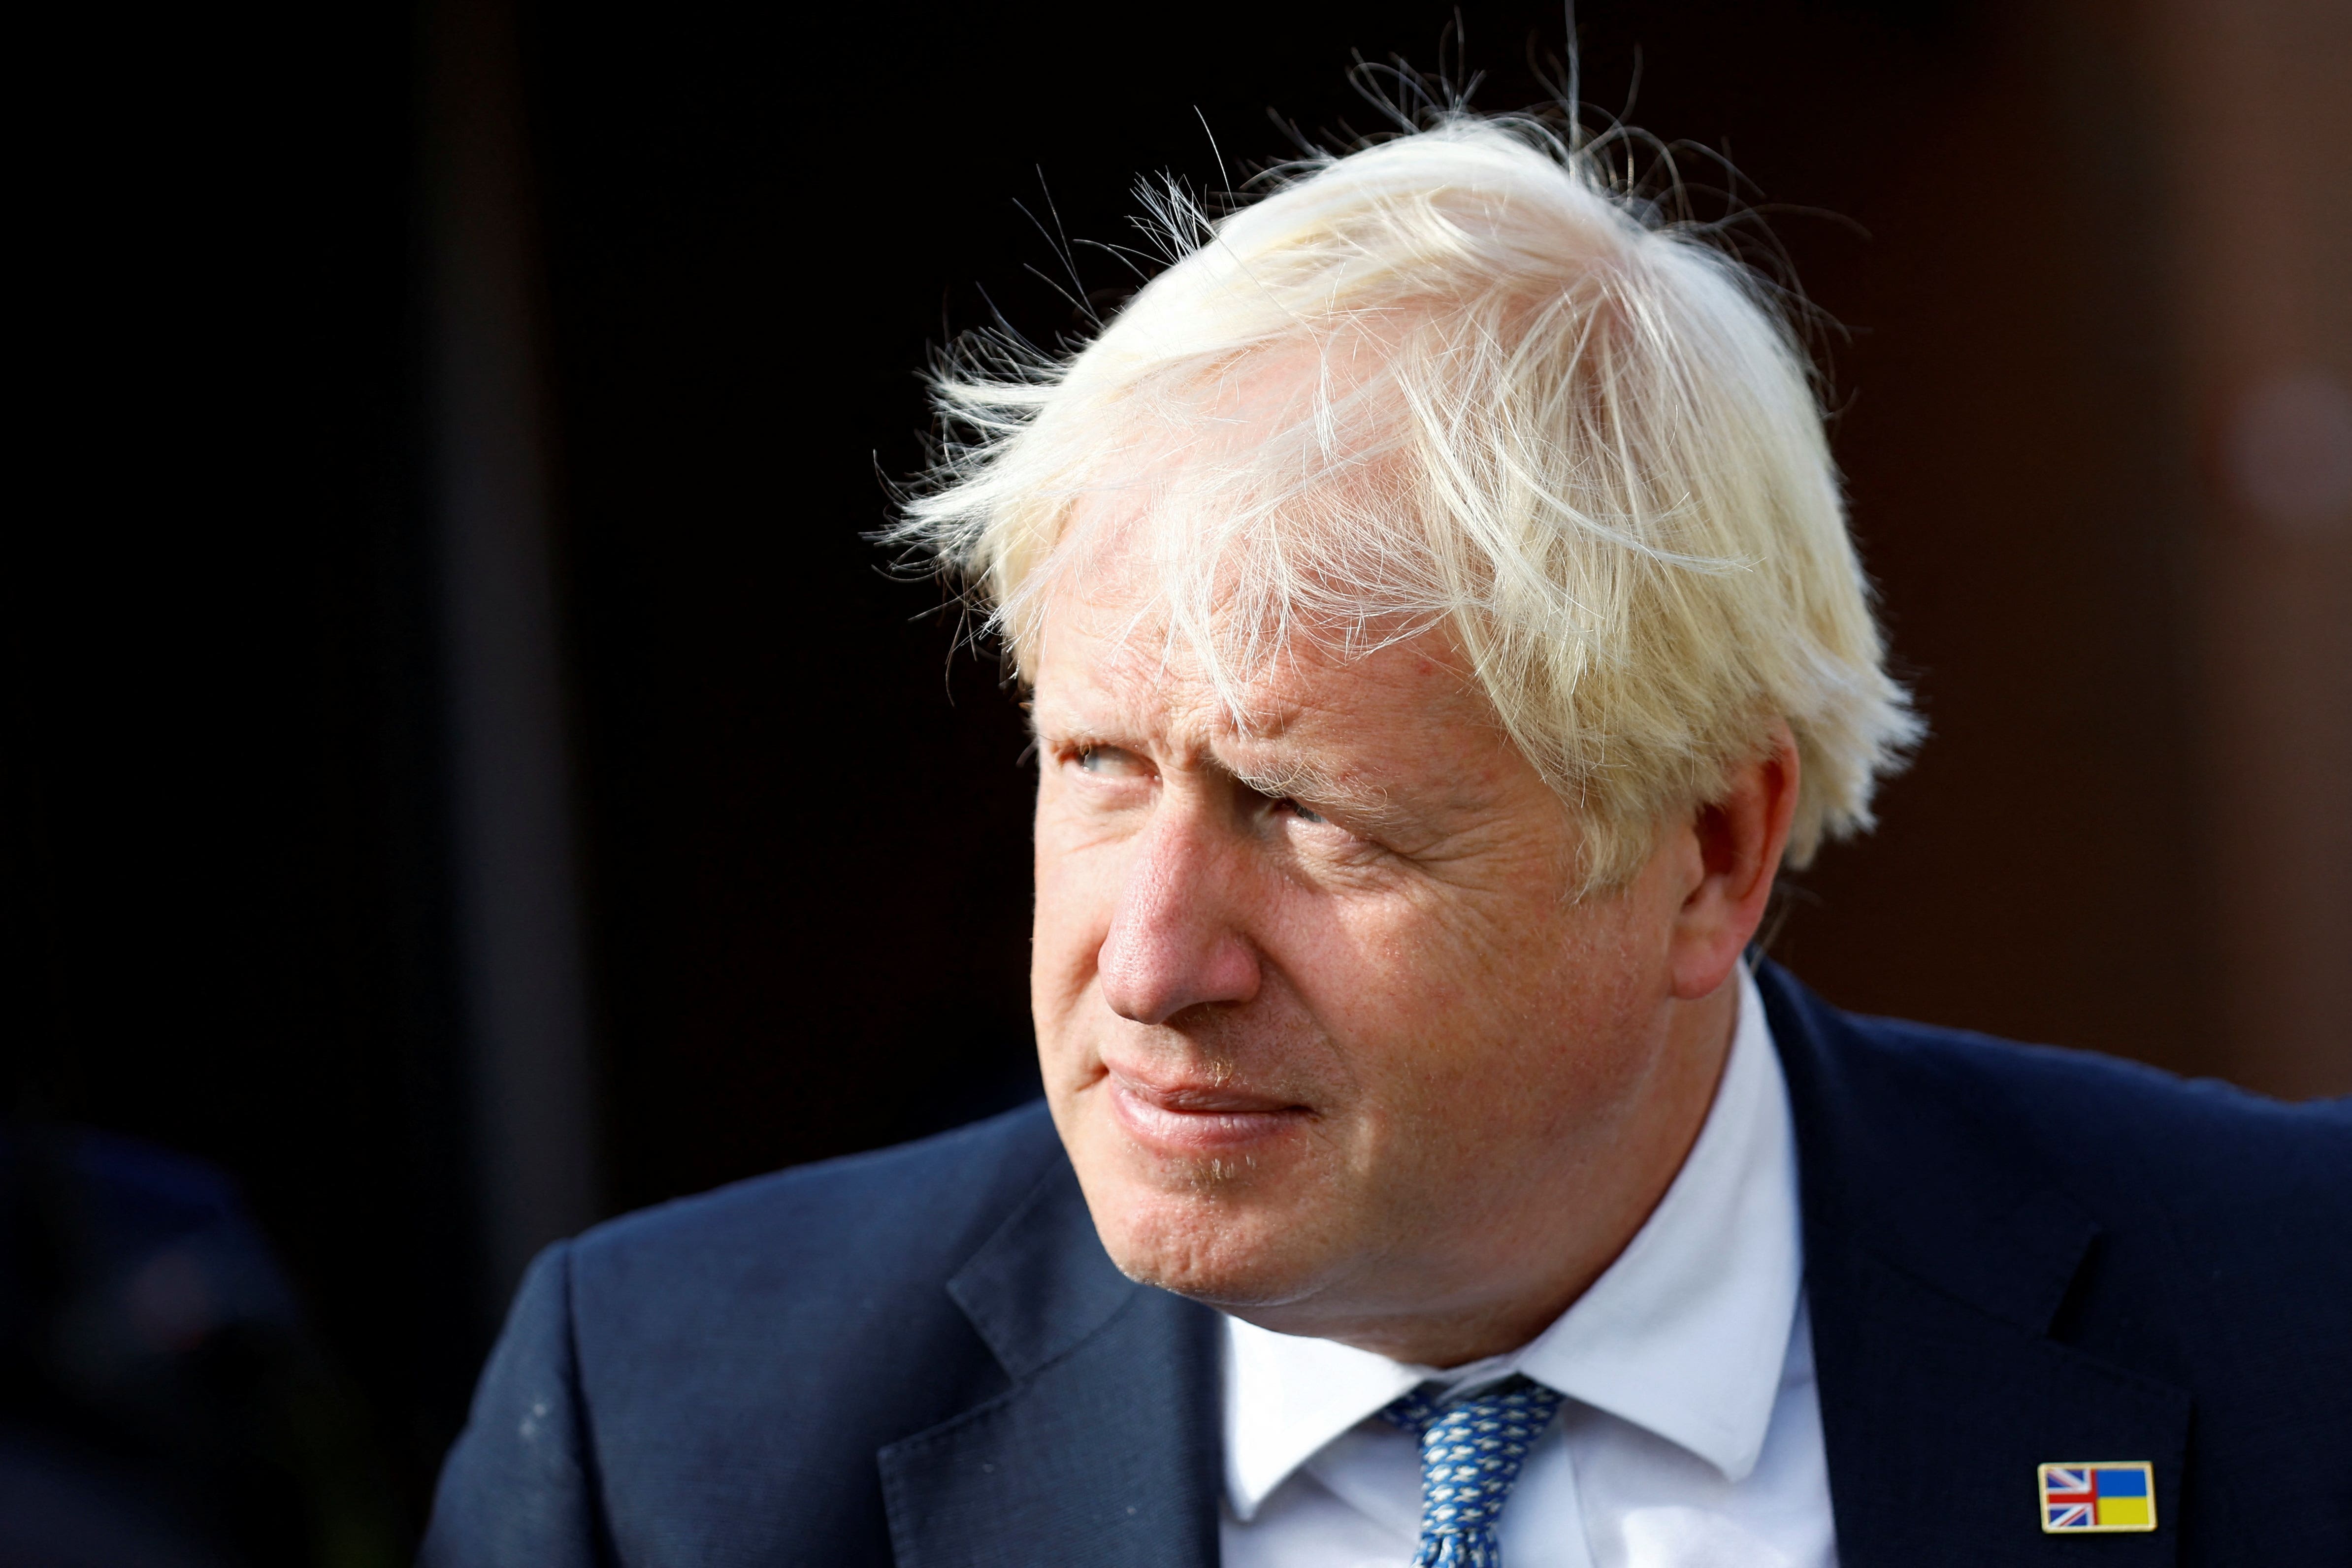 Boris Johnson has taken up a number of speaking engagements since leaving No 10